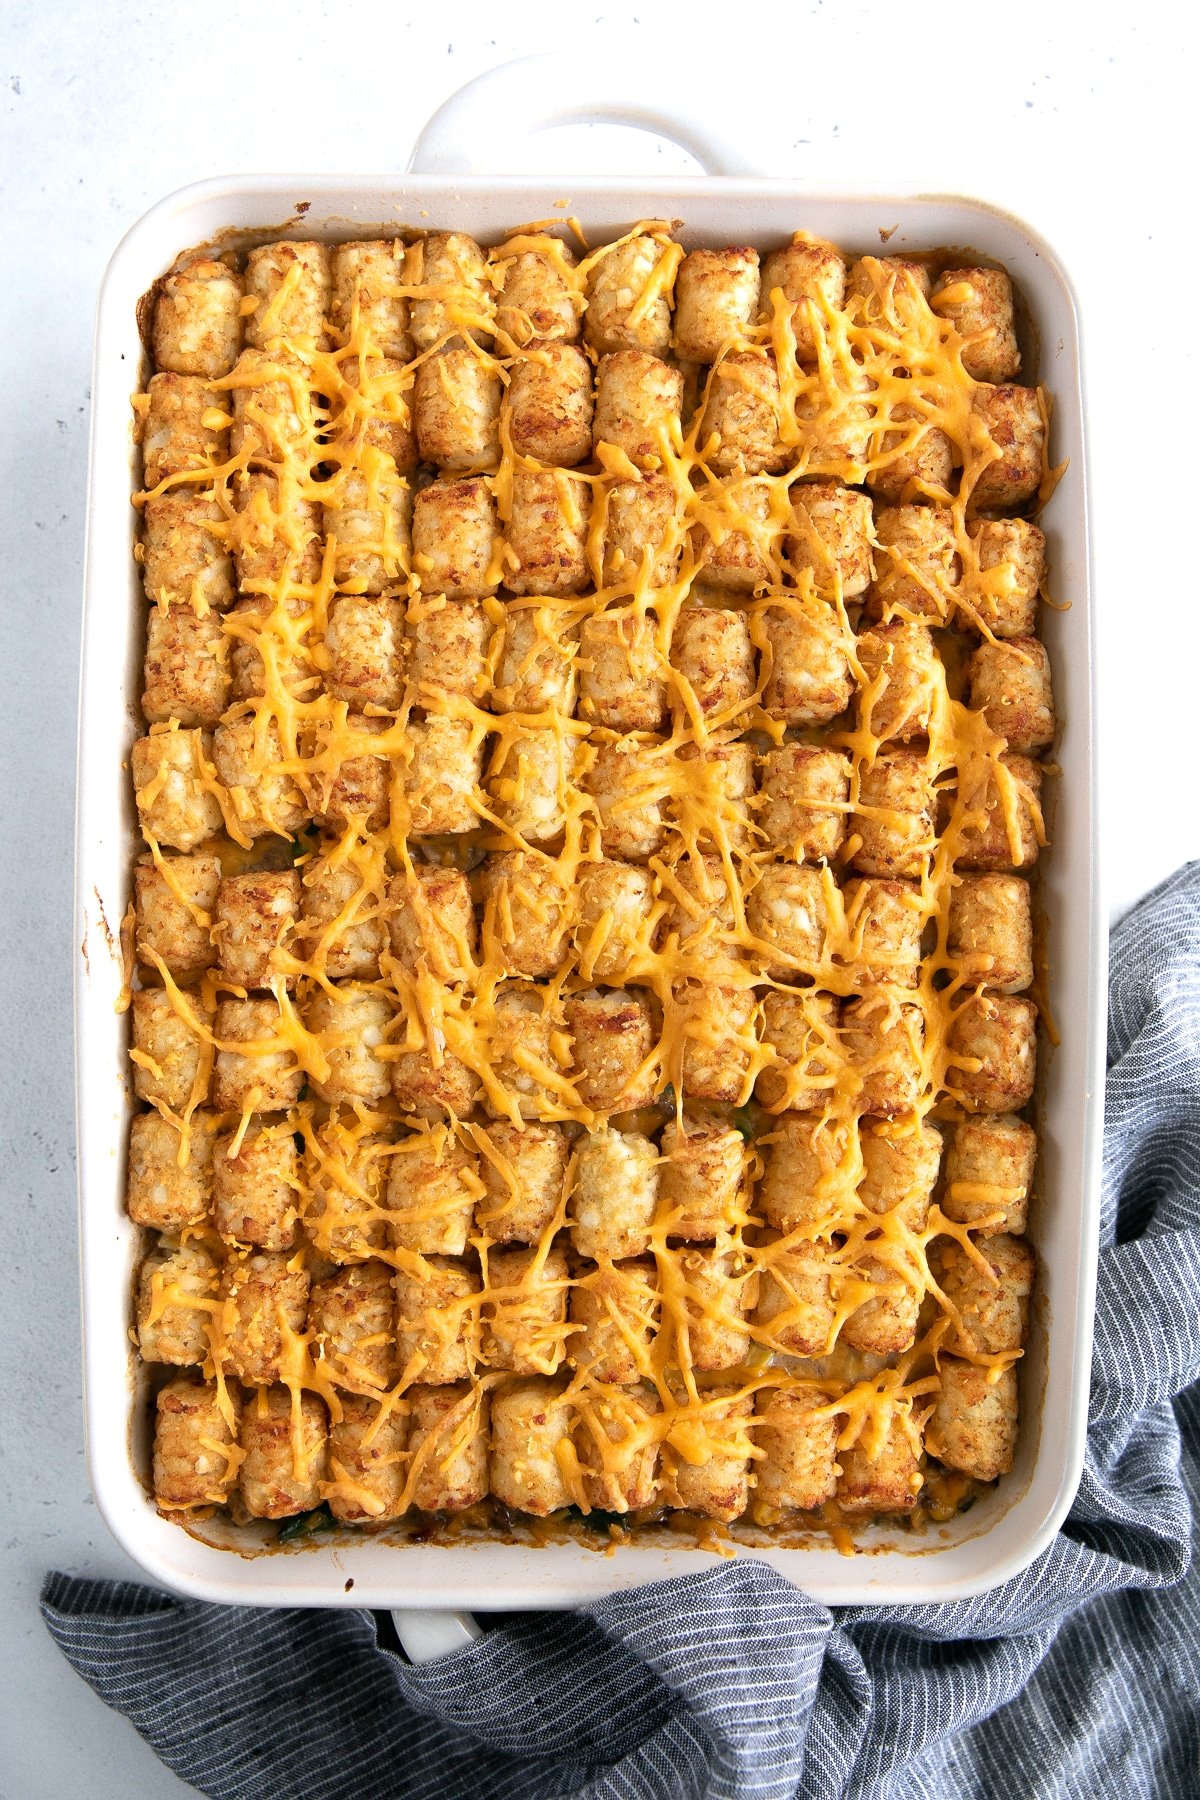 Baked tater tot casserole in a large baking dish.